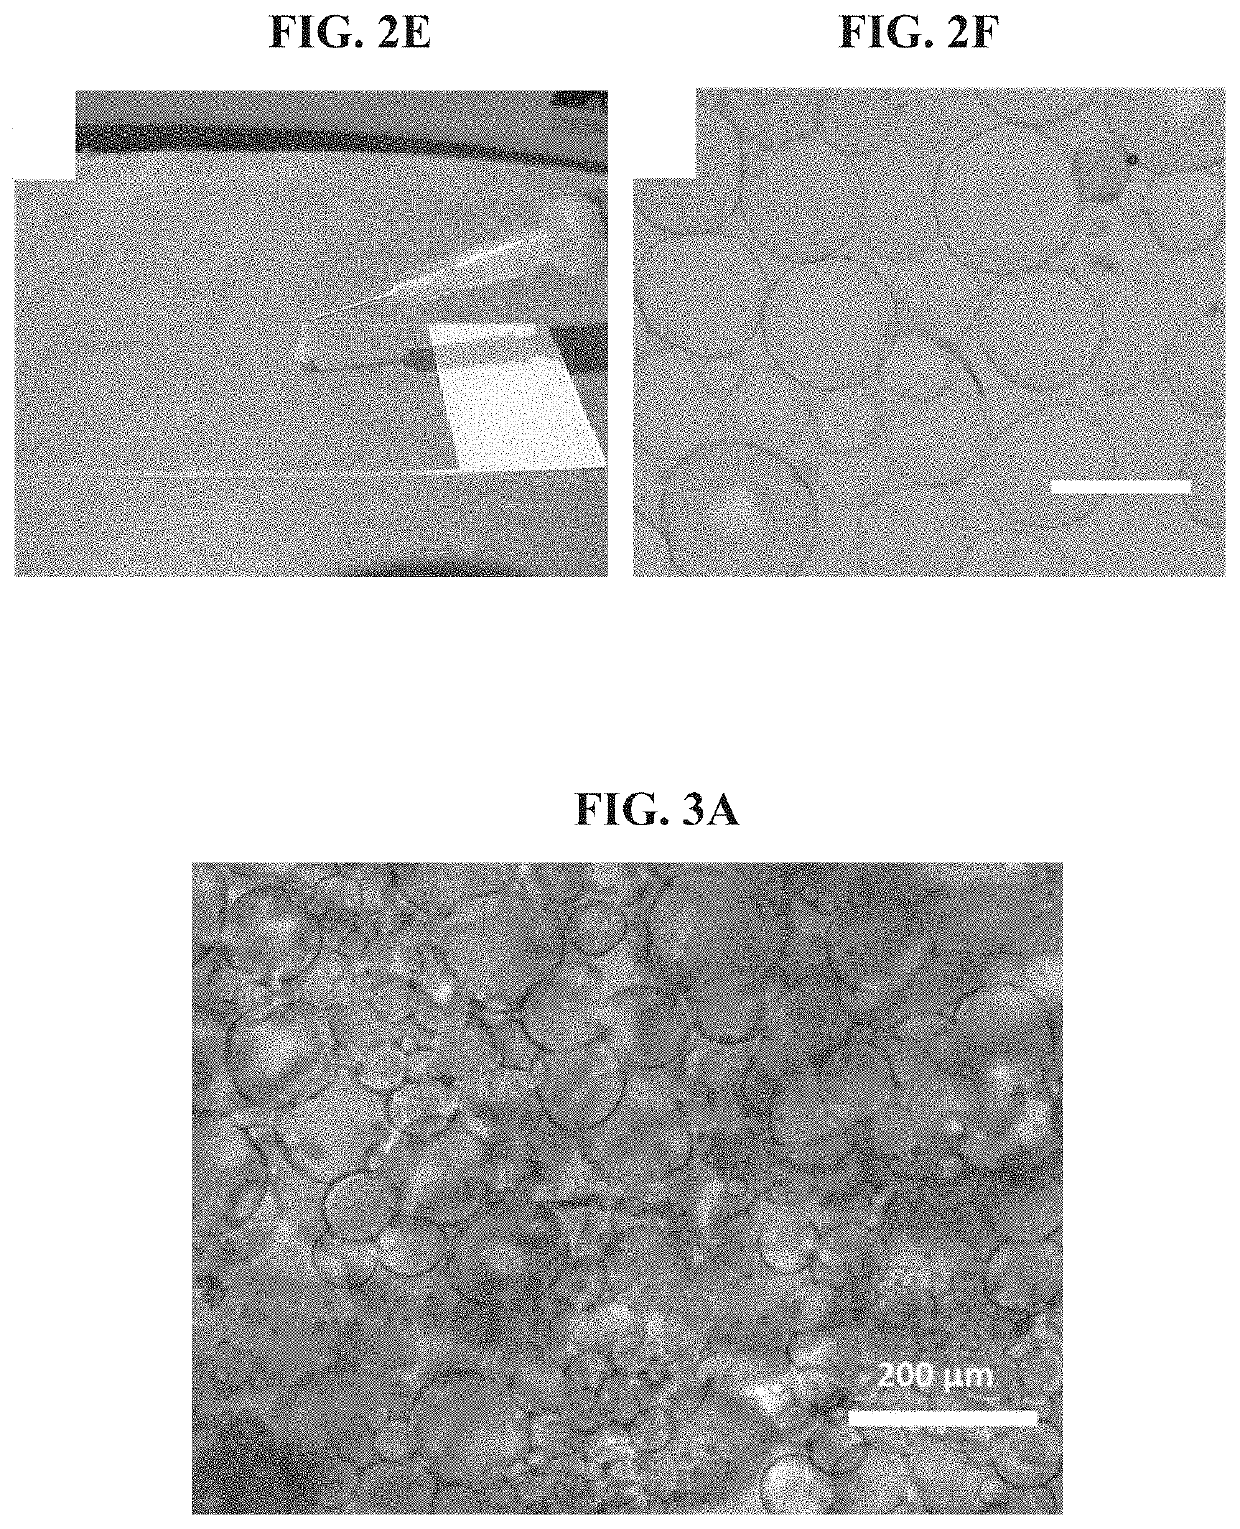 Injectable porous hydrogels